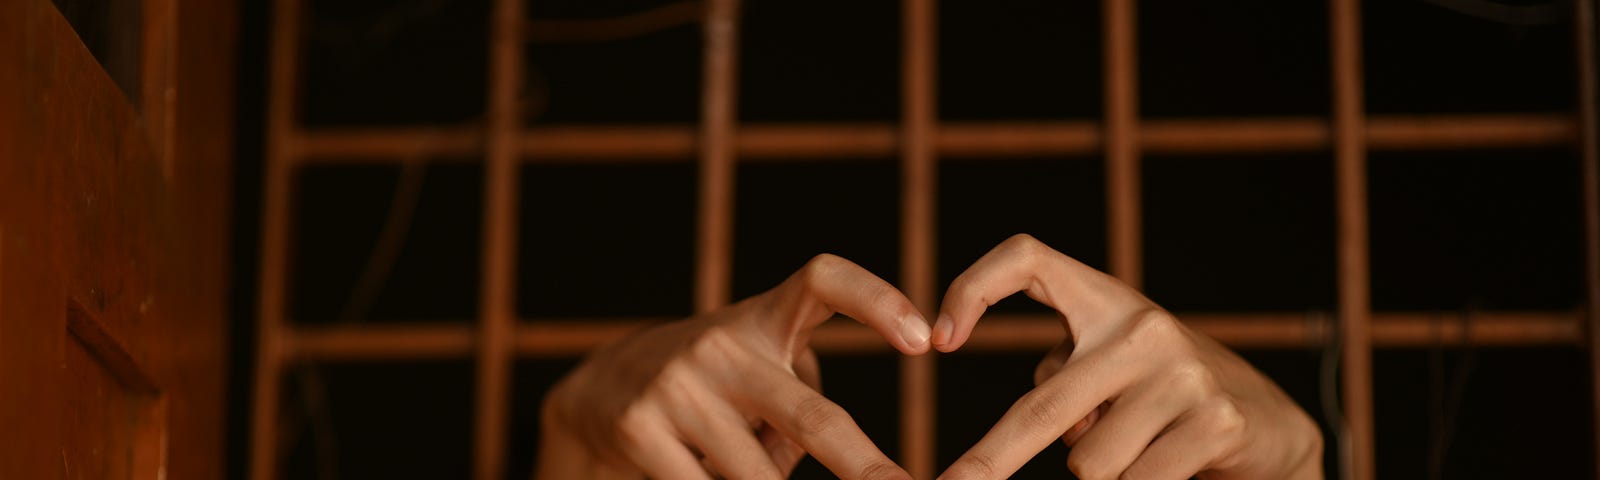 prisoner making a “heart” with their hands